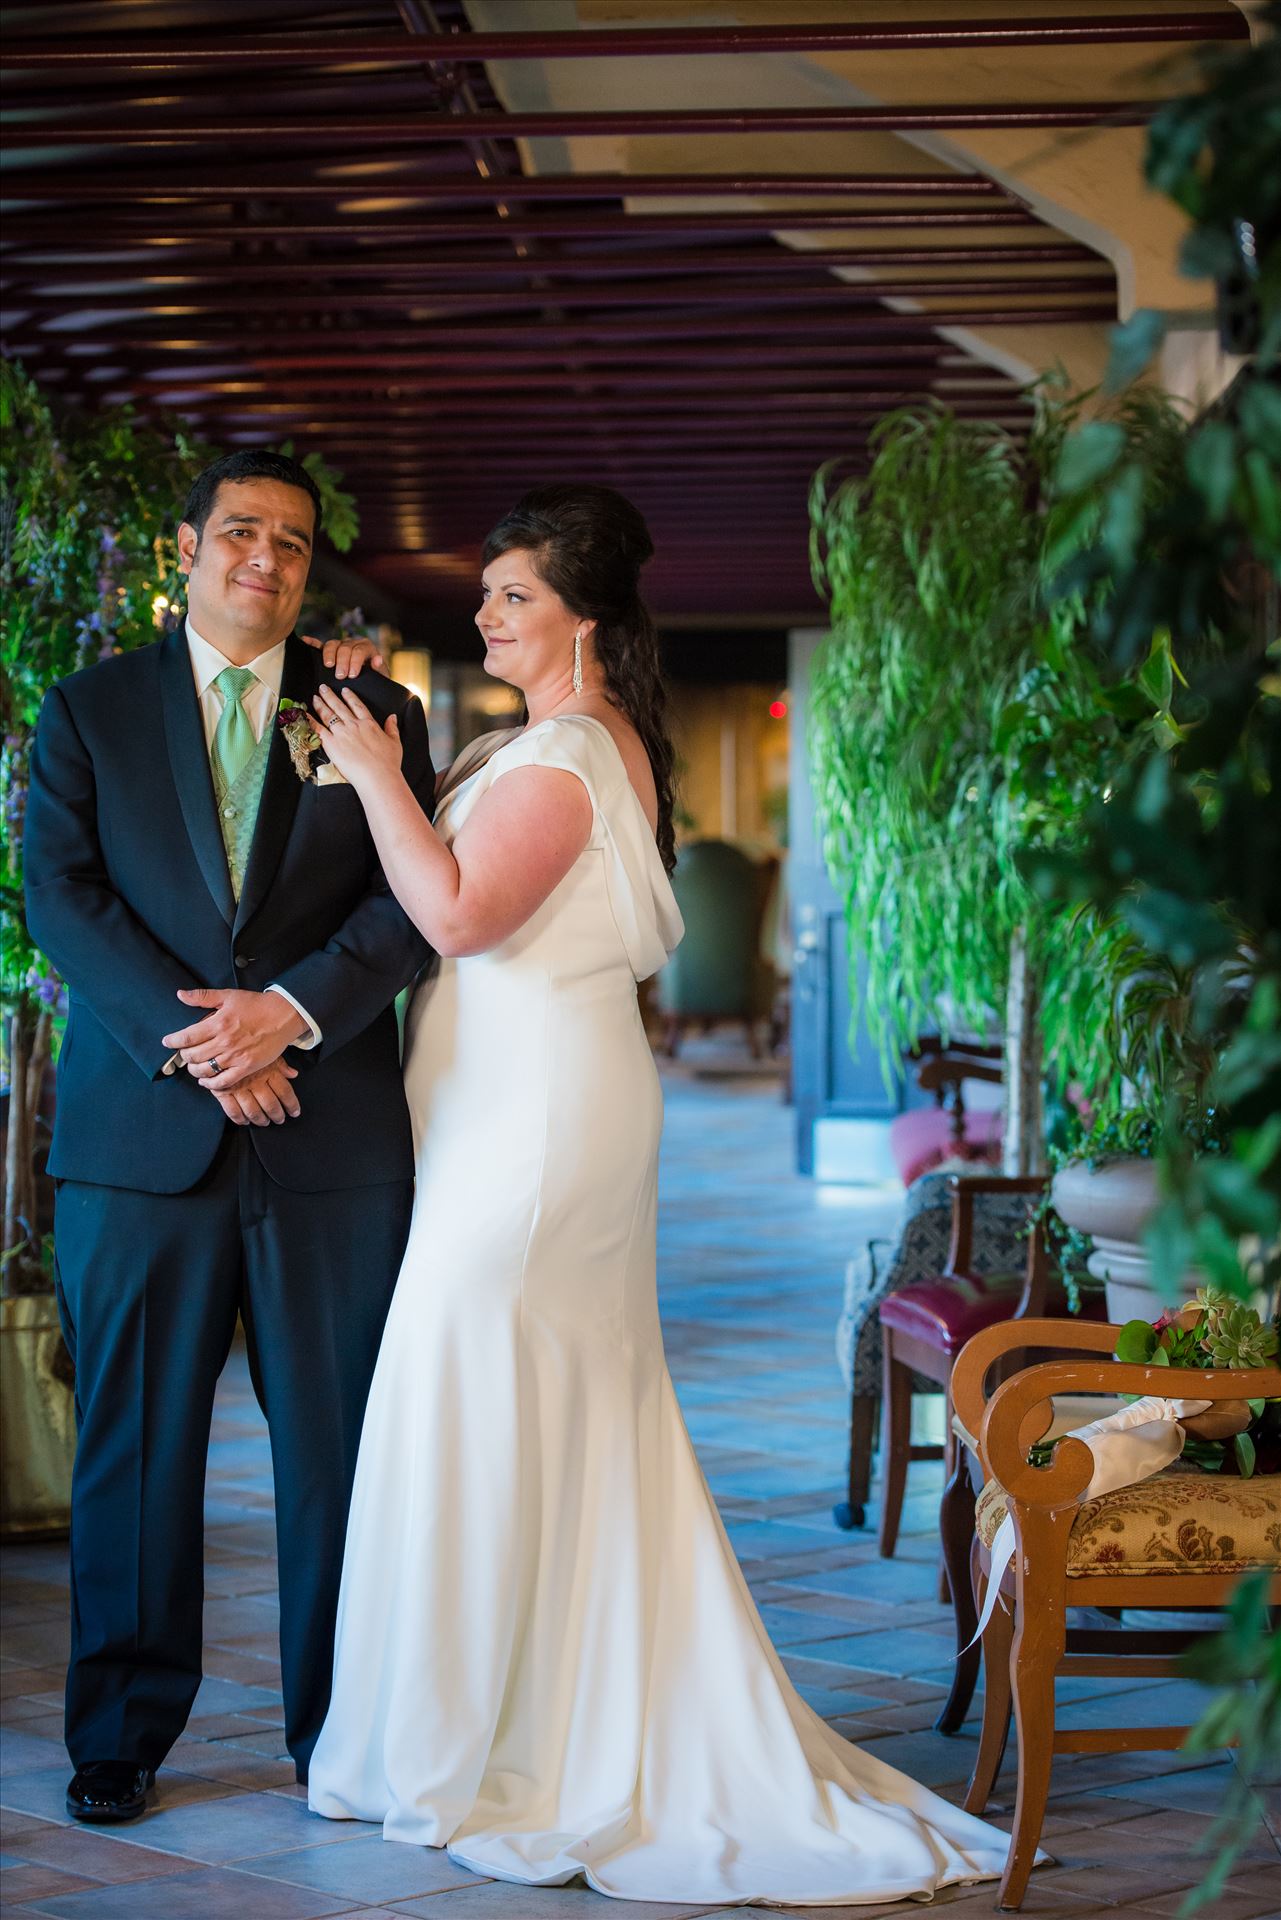 Mary and Alejandro 15 - Wedding photography at the Historic Santa Maria Inn in Santa Maria, California by Mirror's Edge Photography. Bride and Groom in breezeway between the Taproom and the Front Desk at the Santa Maria Inn. by Sarah Williams